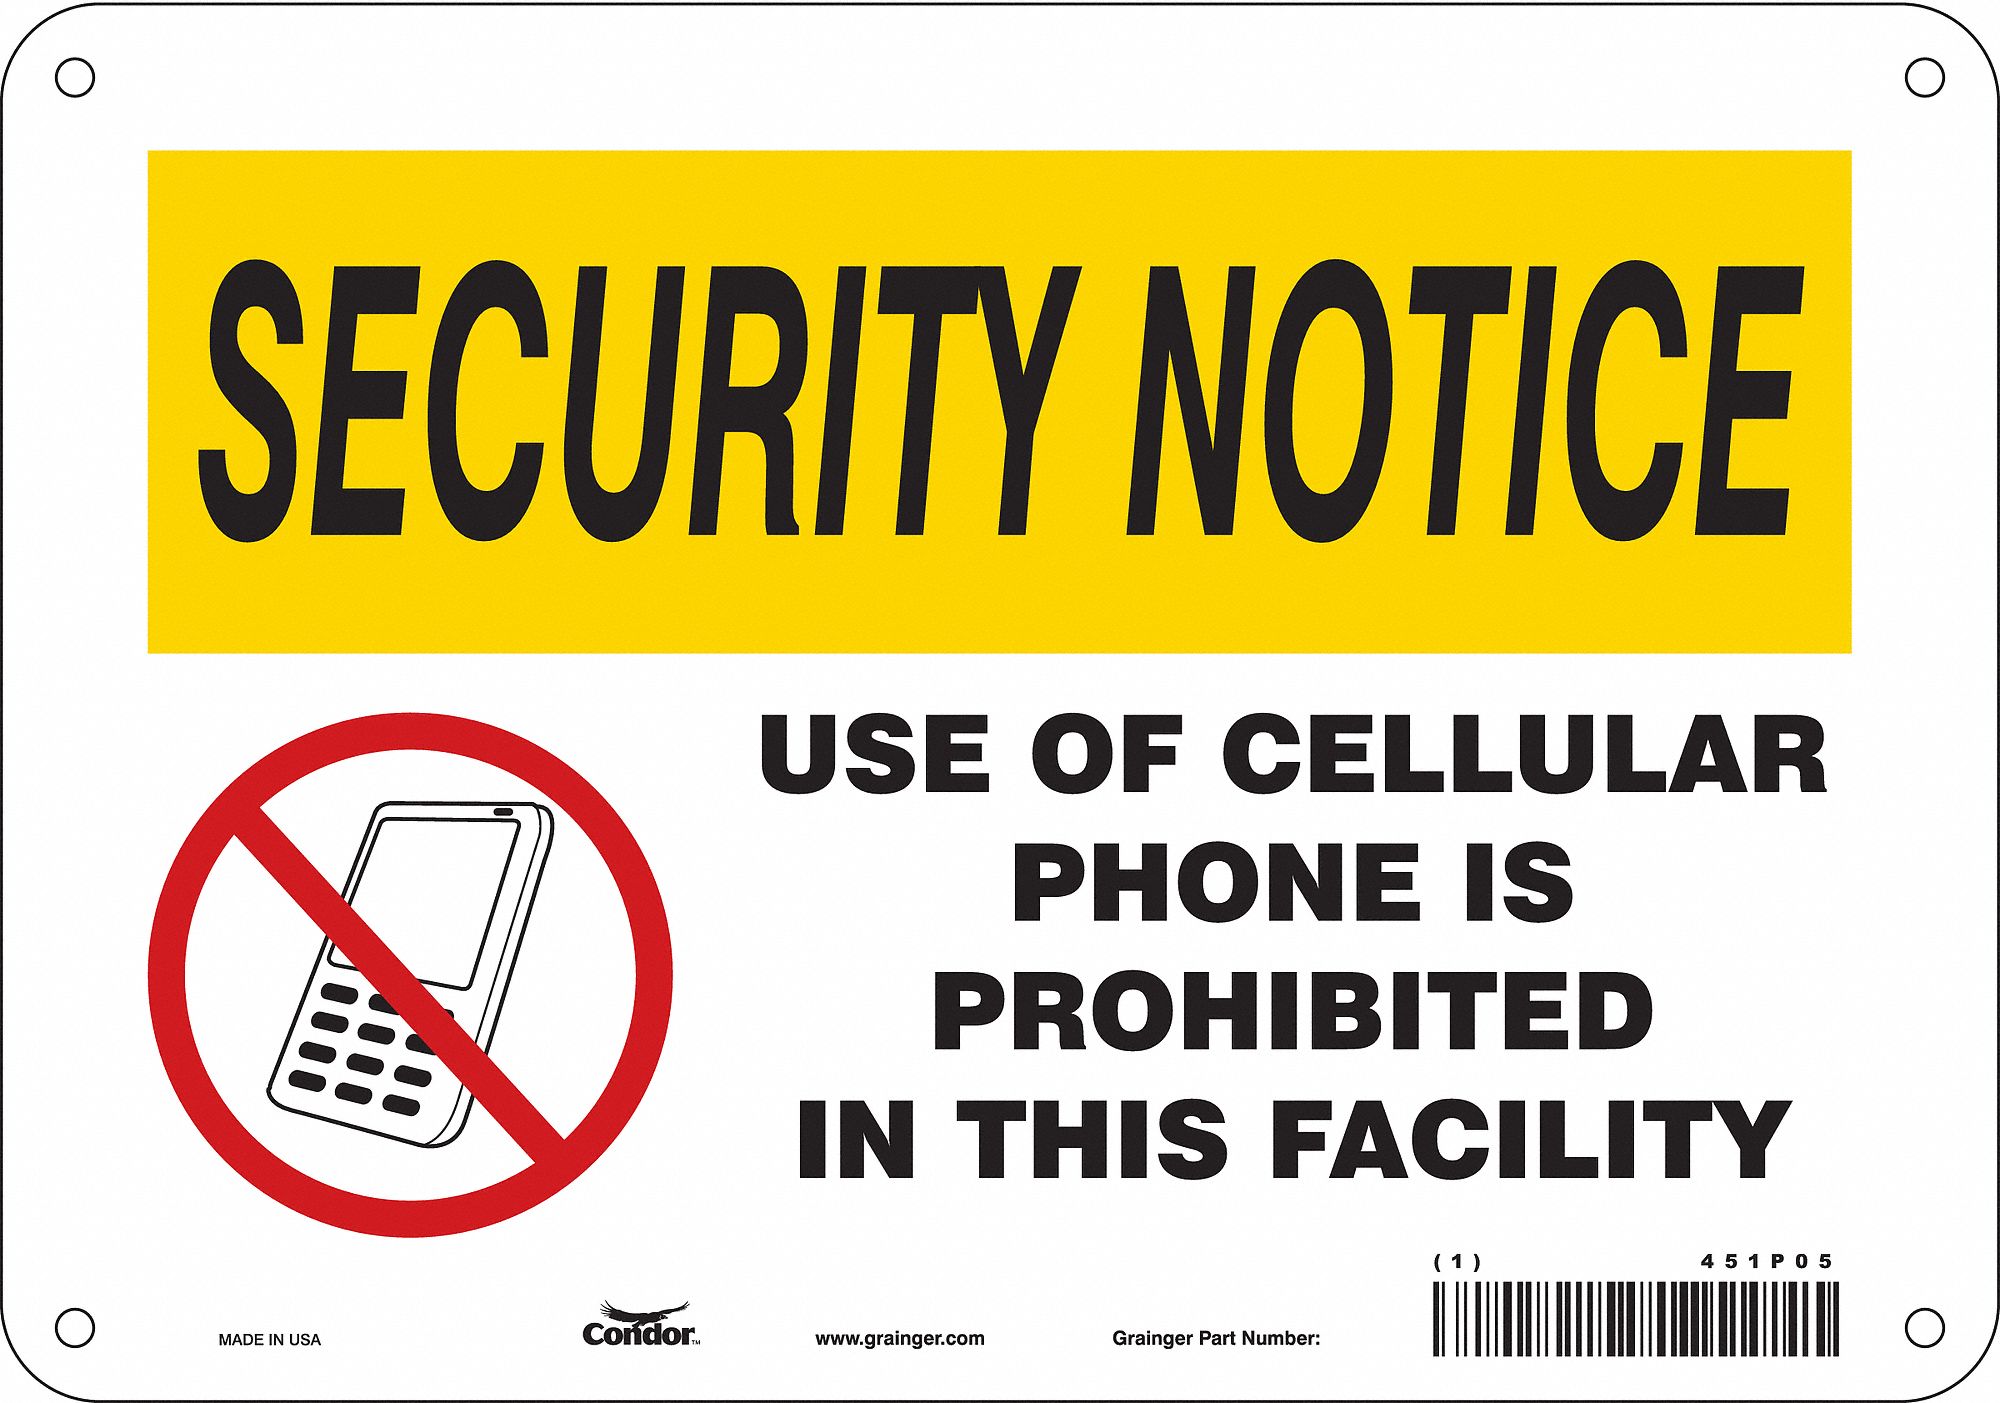 condor-safety-sign-cell-phone-use-of-cellular-phone-is-prohibited-in-this-facility-451p05